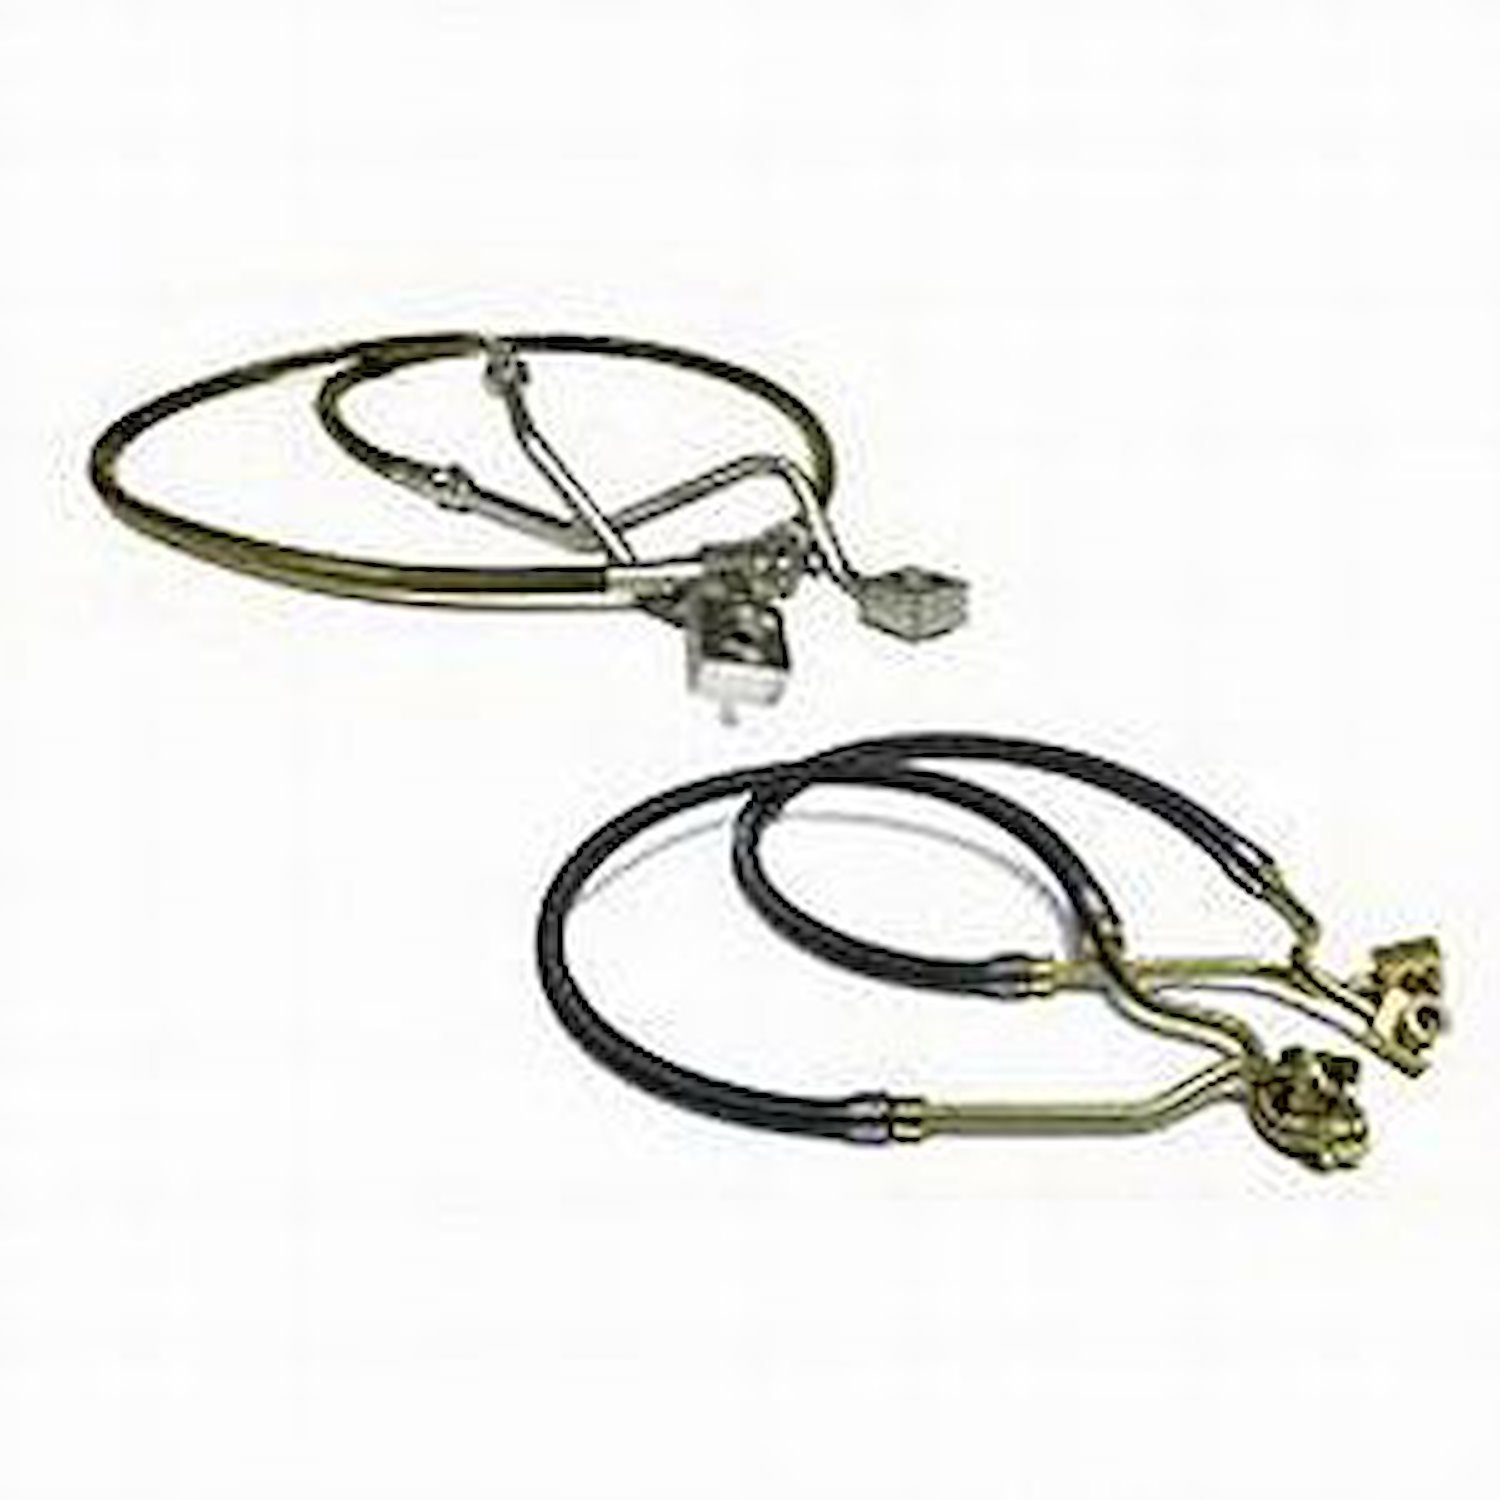 Bullet Proof Kevlar  Brake Hose Front Reinforced Braided Stainless Steel Length Over Stock 4 in. Vehicles w/3-6 in. Lift